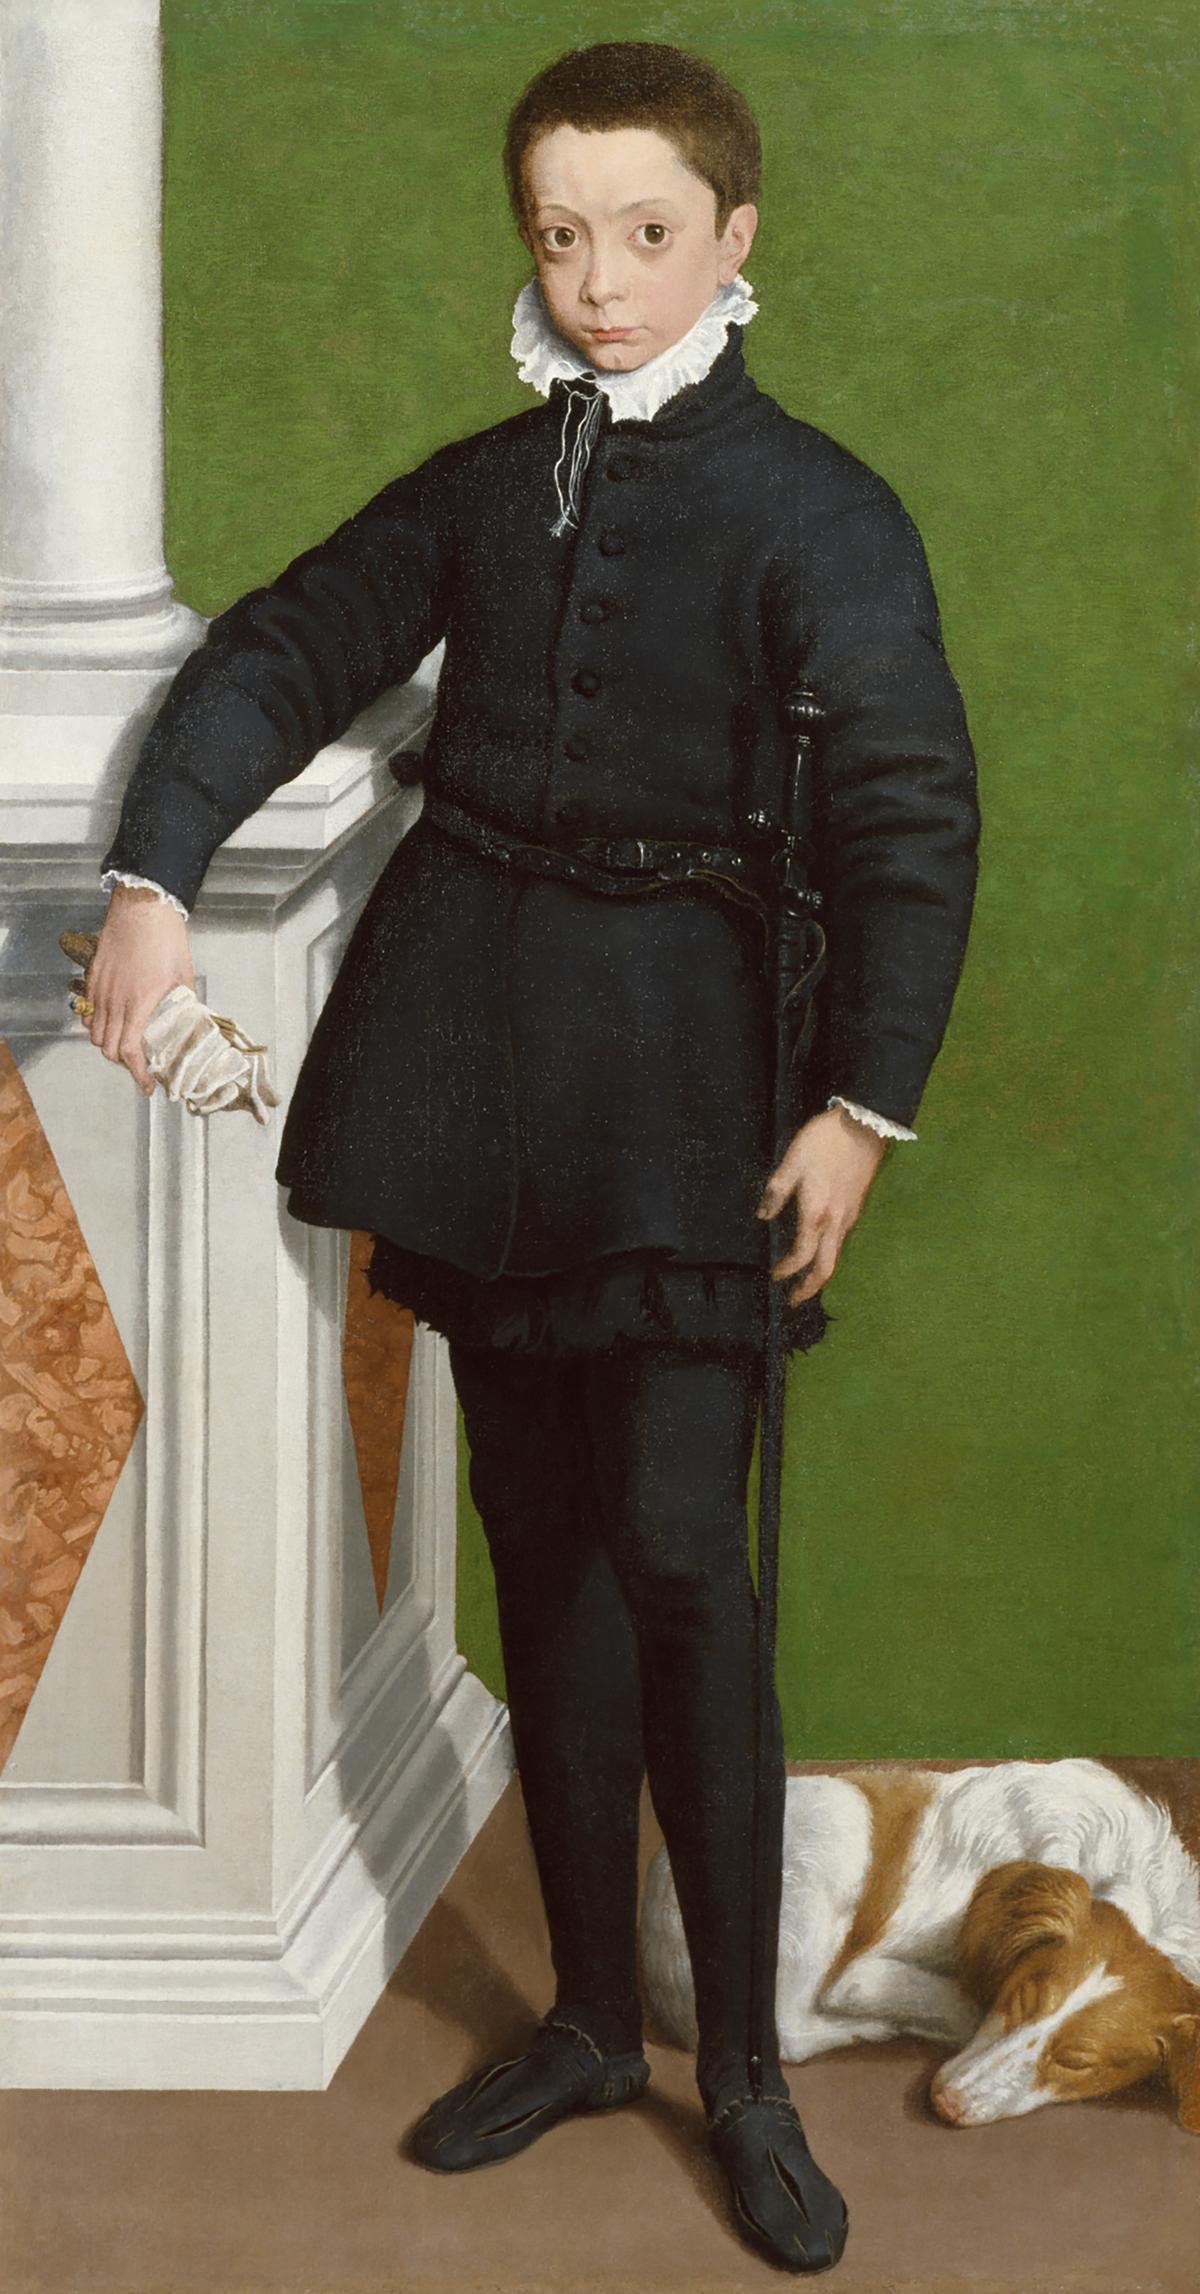 "Portrait of Marquess Massimiliano Stampa," 1557, by Sofonisba Anguissola. Oil on canvas; 53 1/8 inches by 28 inches. The Walters Art Museum, Baltimore. (Public Domain)